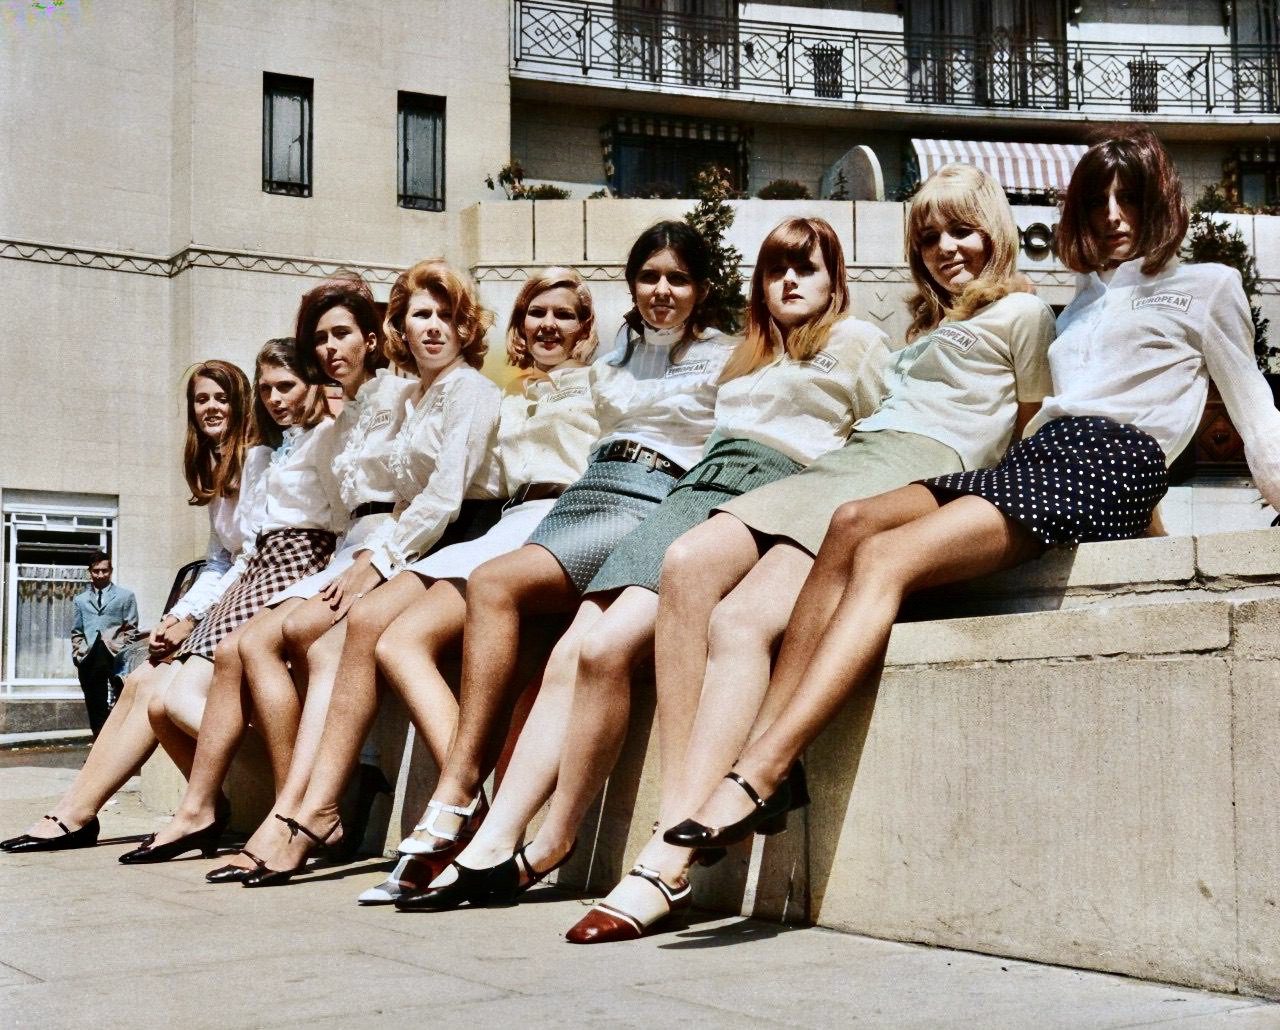 The staff showing of their Mini Skirts